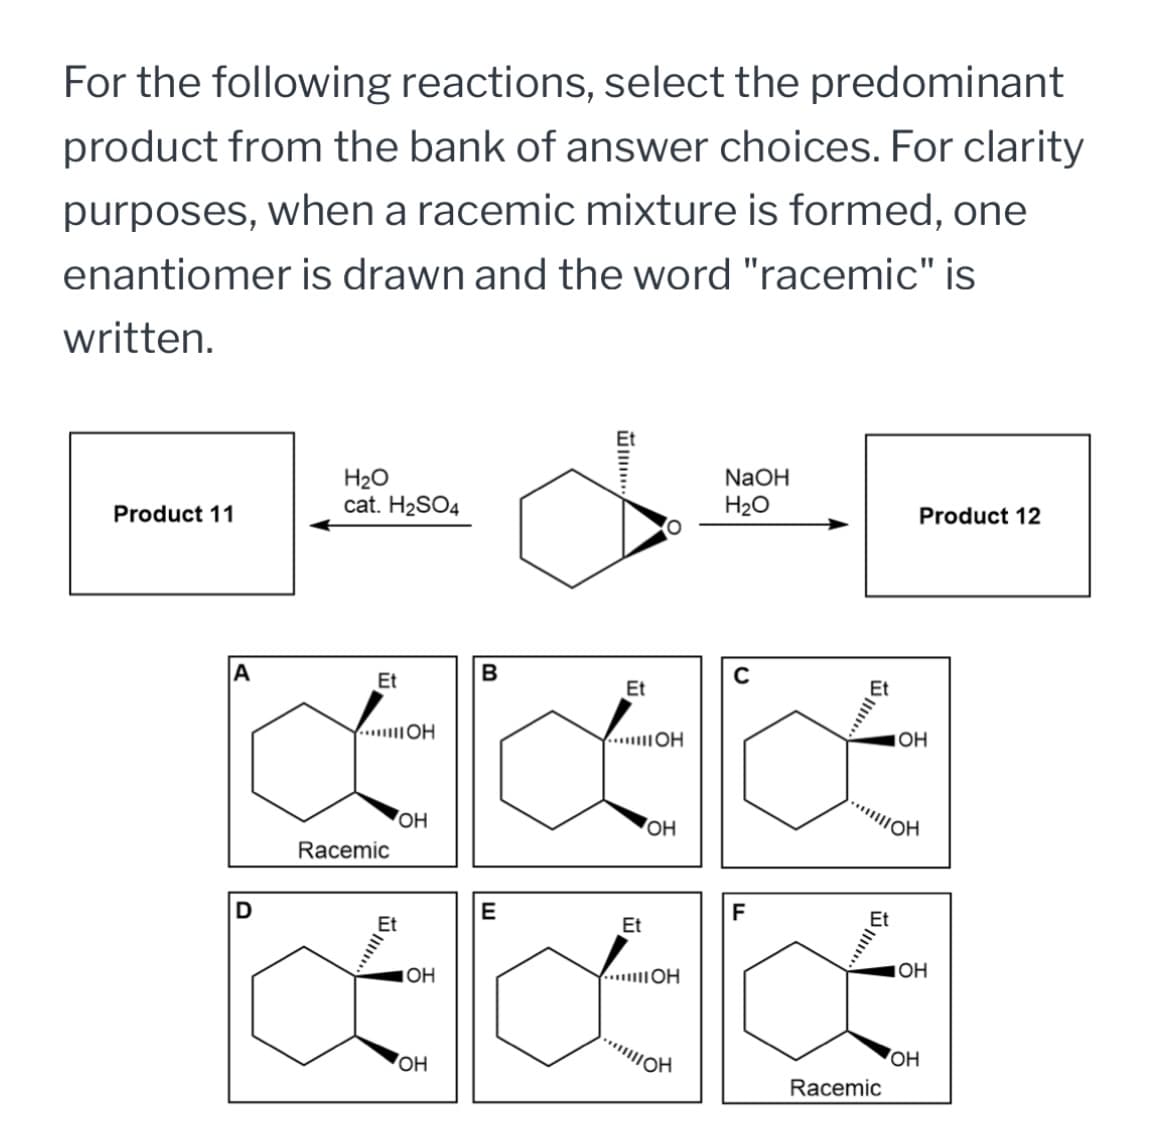 For the following reactions, select the predominant
product from the bank of answer choices. For clarity
purposes, when a racemic mixture is formed, one
enantiomer is drawn and the word "racemic" is
written.
H2O
NaOH
cat. H2SO4
H₂O
Product 11
Product 12
Et
OH
B
Et
...OH
C
OH
444
D
Racemic
OH
OH
E
Et
OH
...IOH
F
OH
Et
IOH
AKK
OH
Racemic
OH